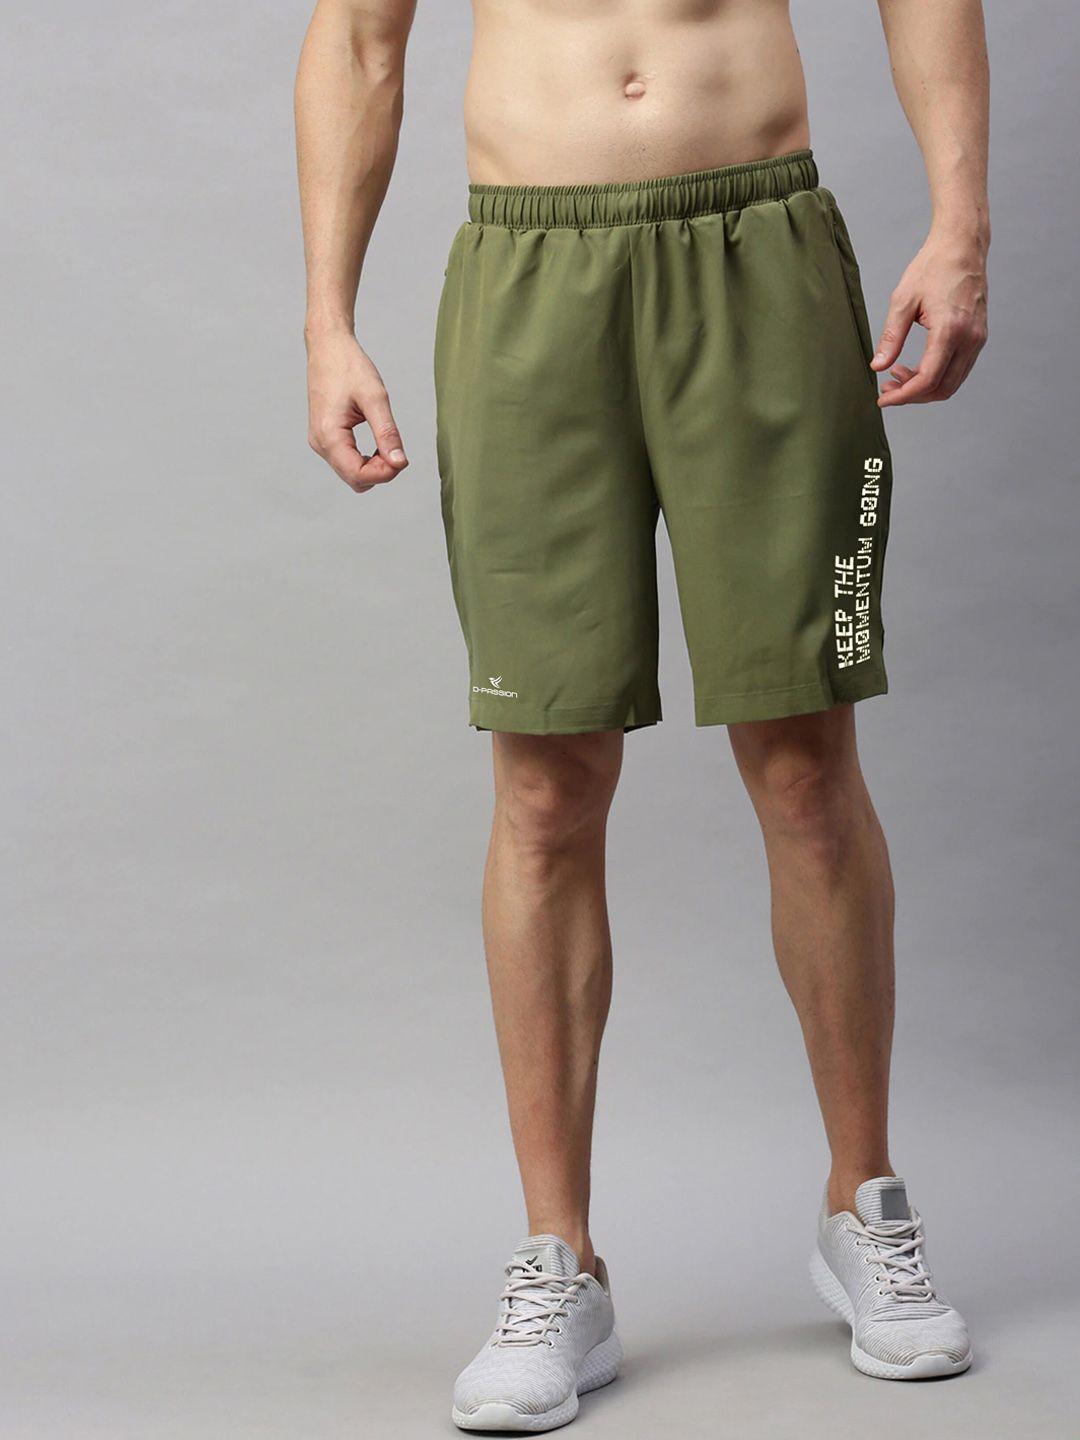 dpassion men olive green training or gym sports shorts